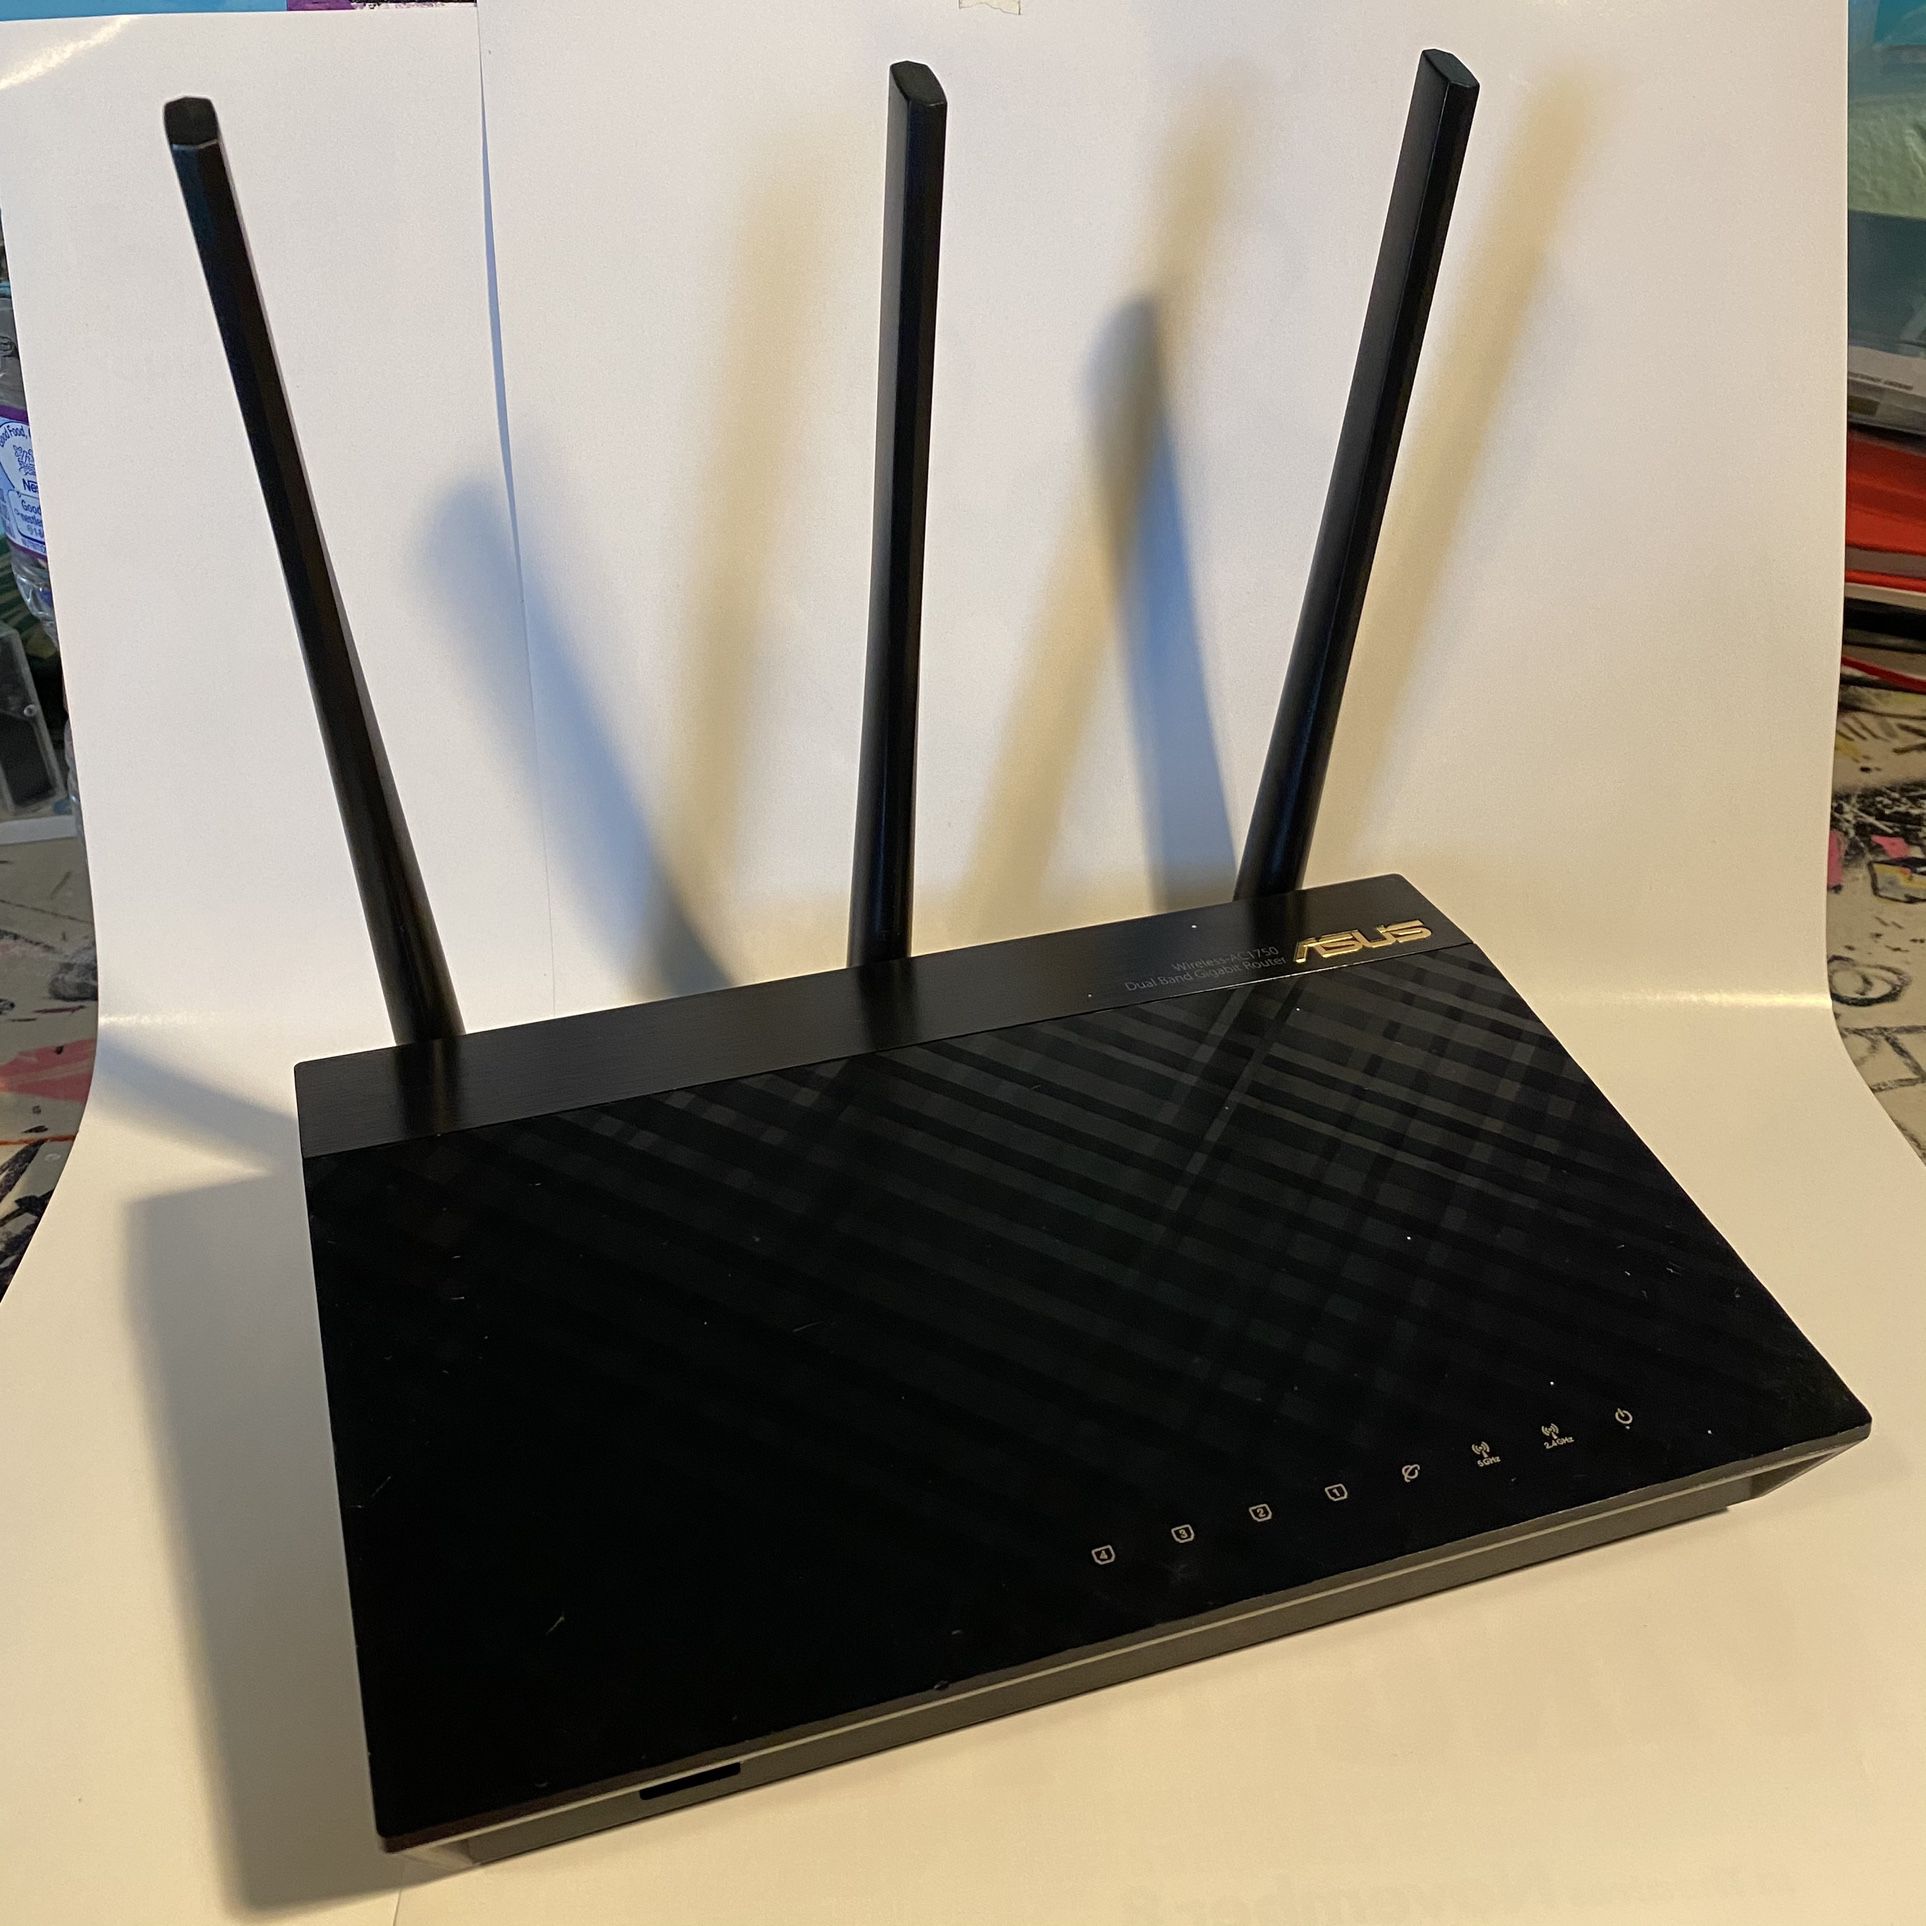 ASUS Dual-Band WiFi Router RT-AC66U AC1750